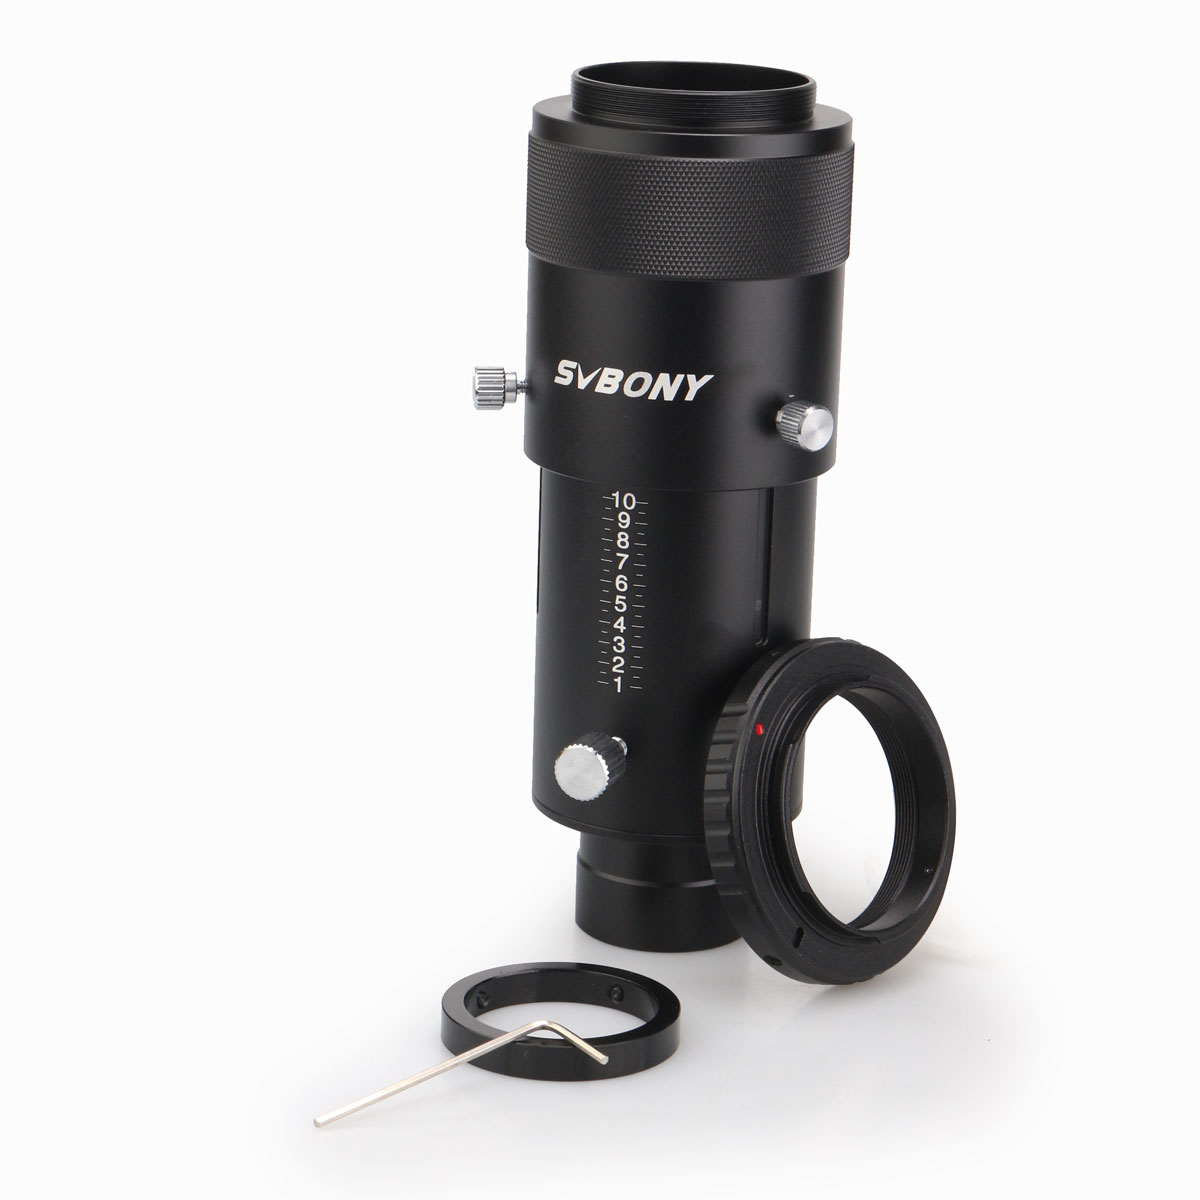 SVBONY-SV112-125quot-Fully-Metal-Deluxe-Variable-Eyepiece-Projection-Kit-for-Telescopes-with-T-Ring--1842642-2